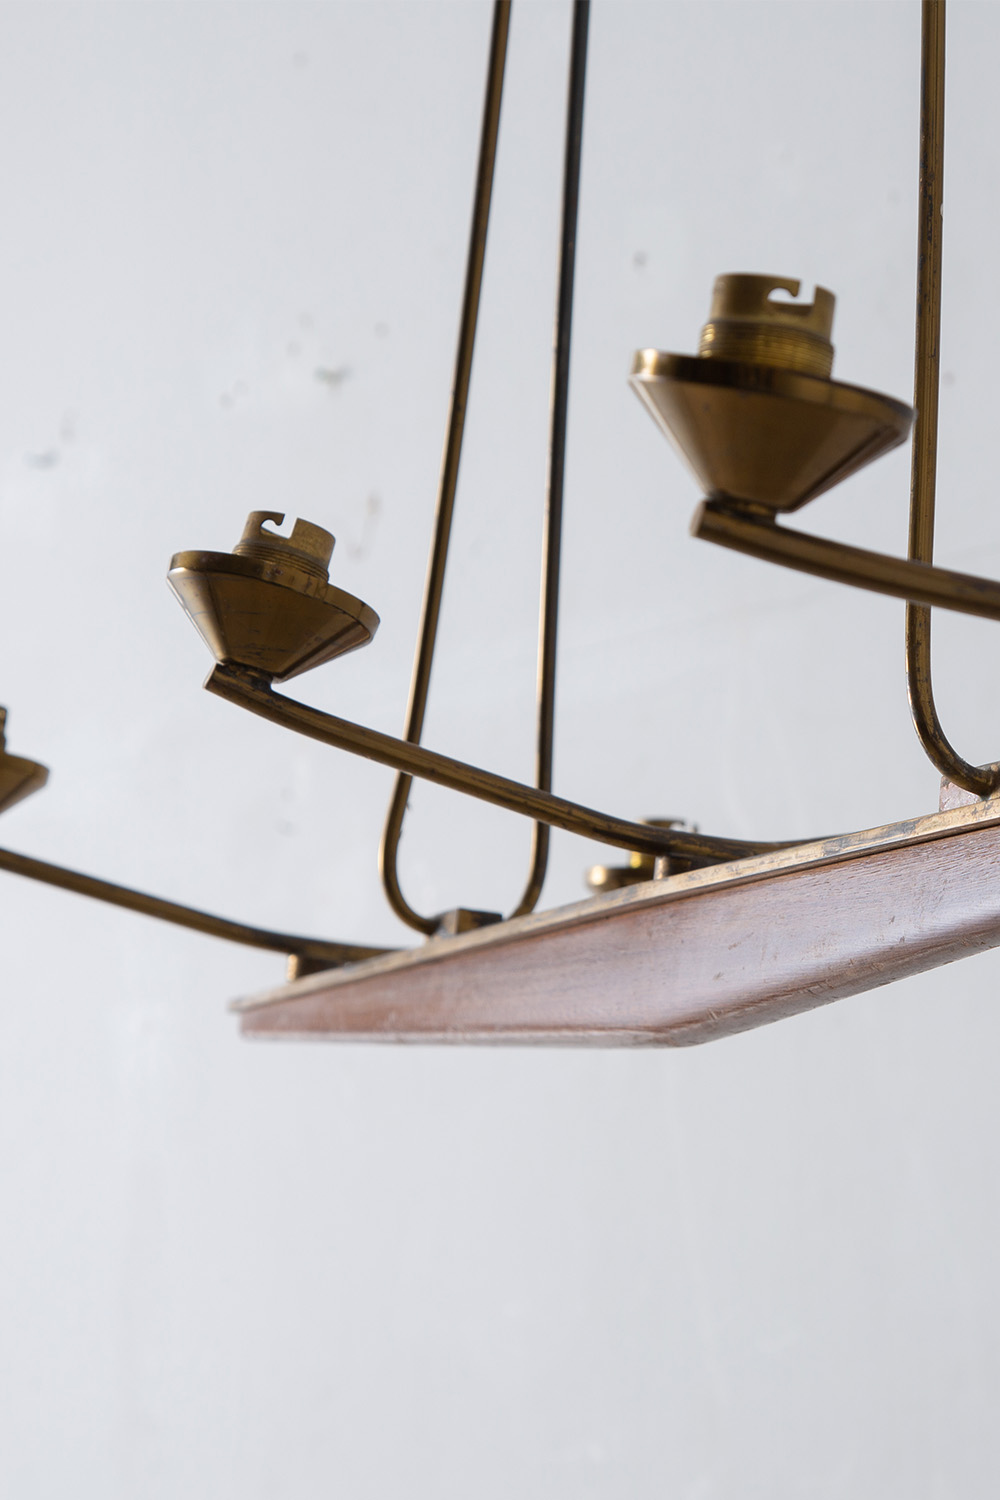 6 Pendant Light in Brass and Wood